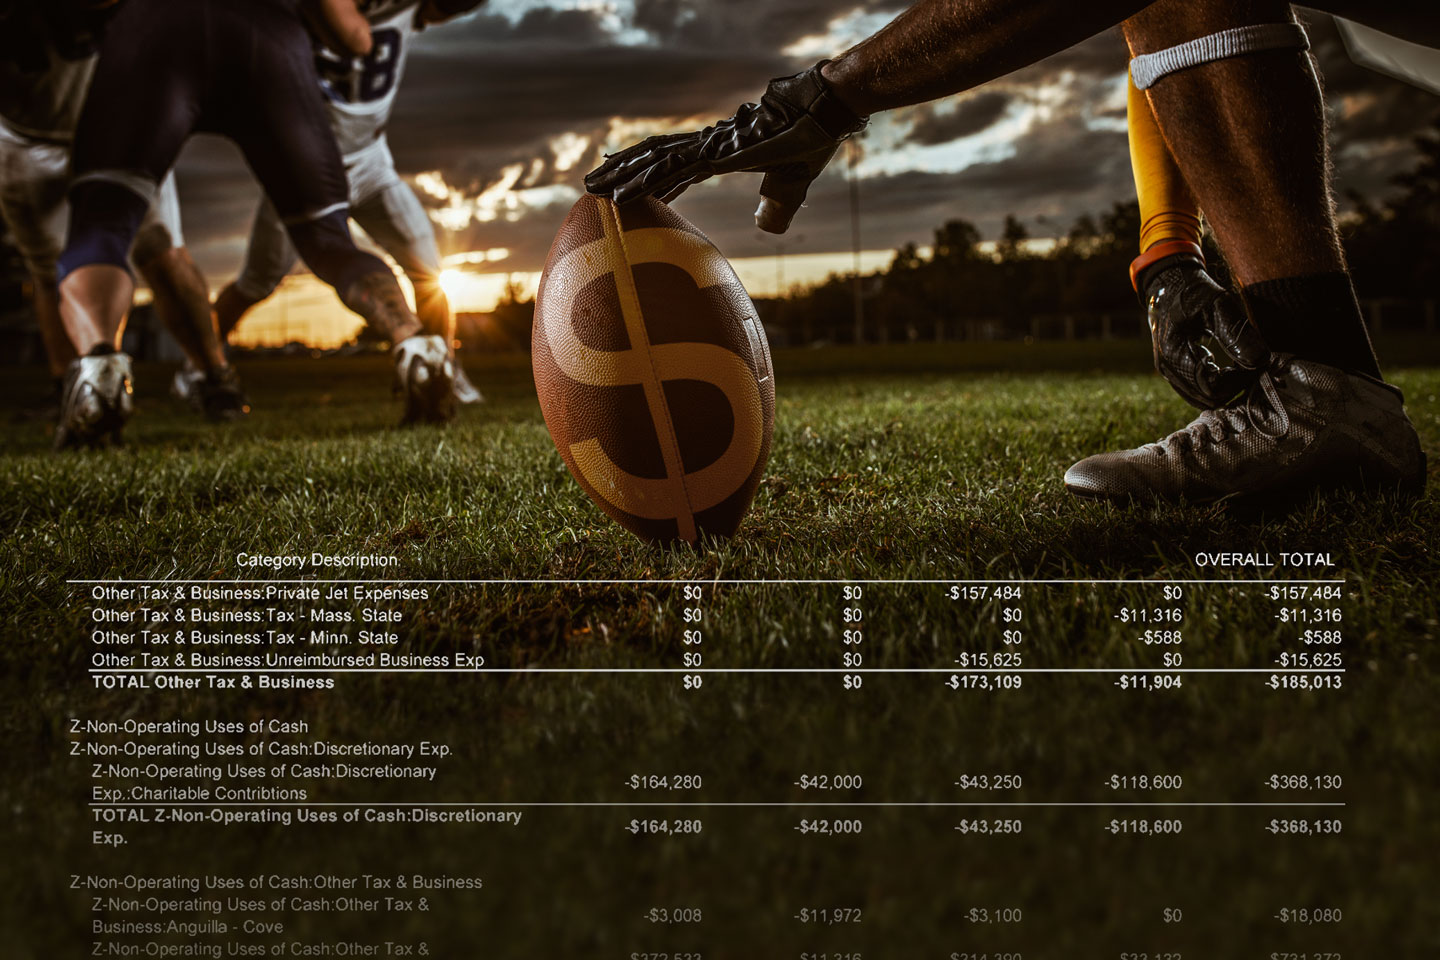 A Team-Based Approach to the Financial Health of Athletes